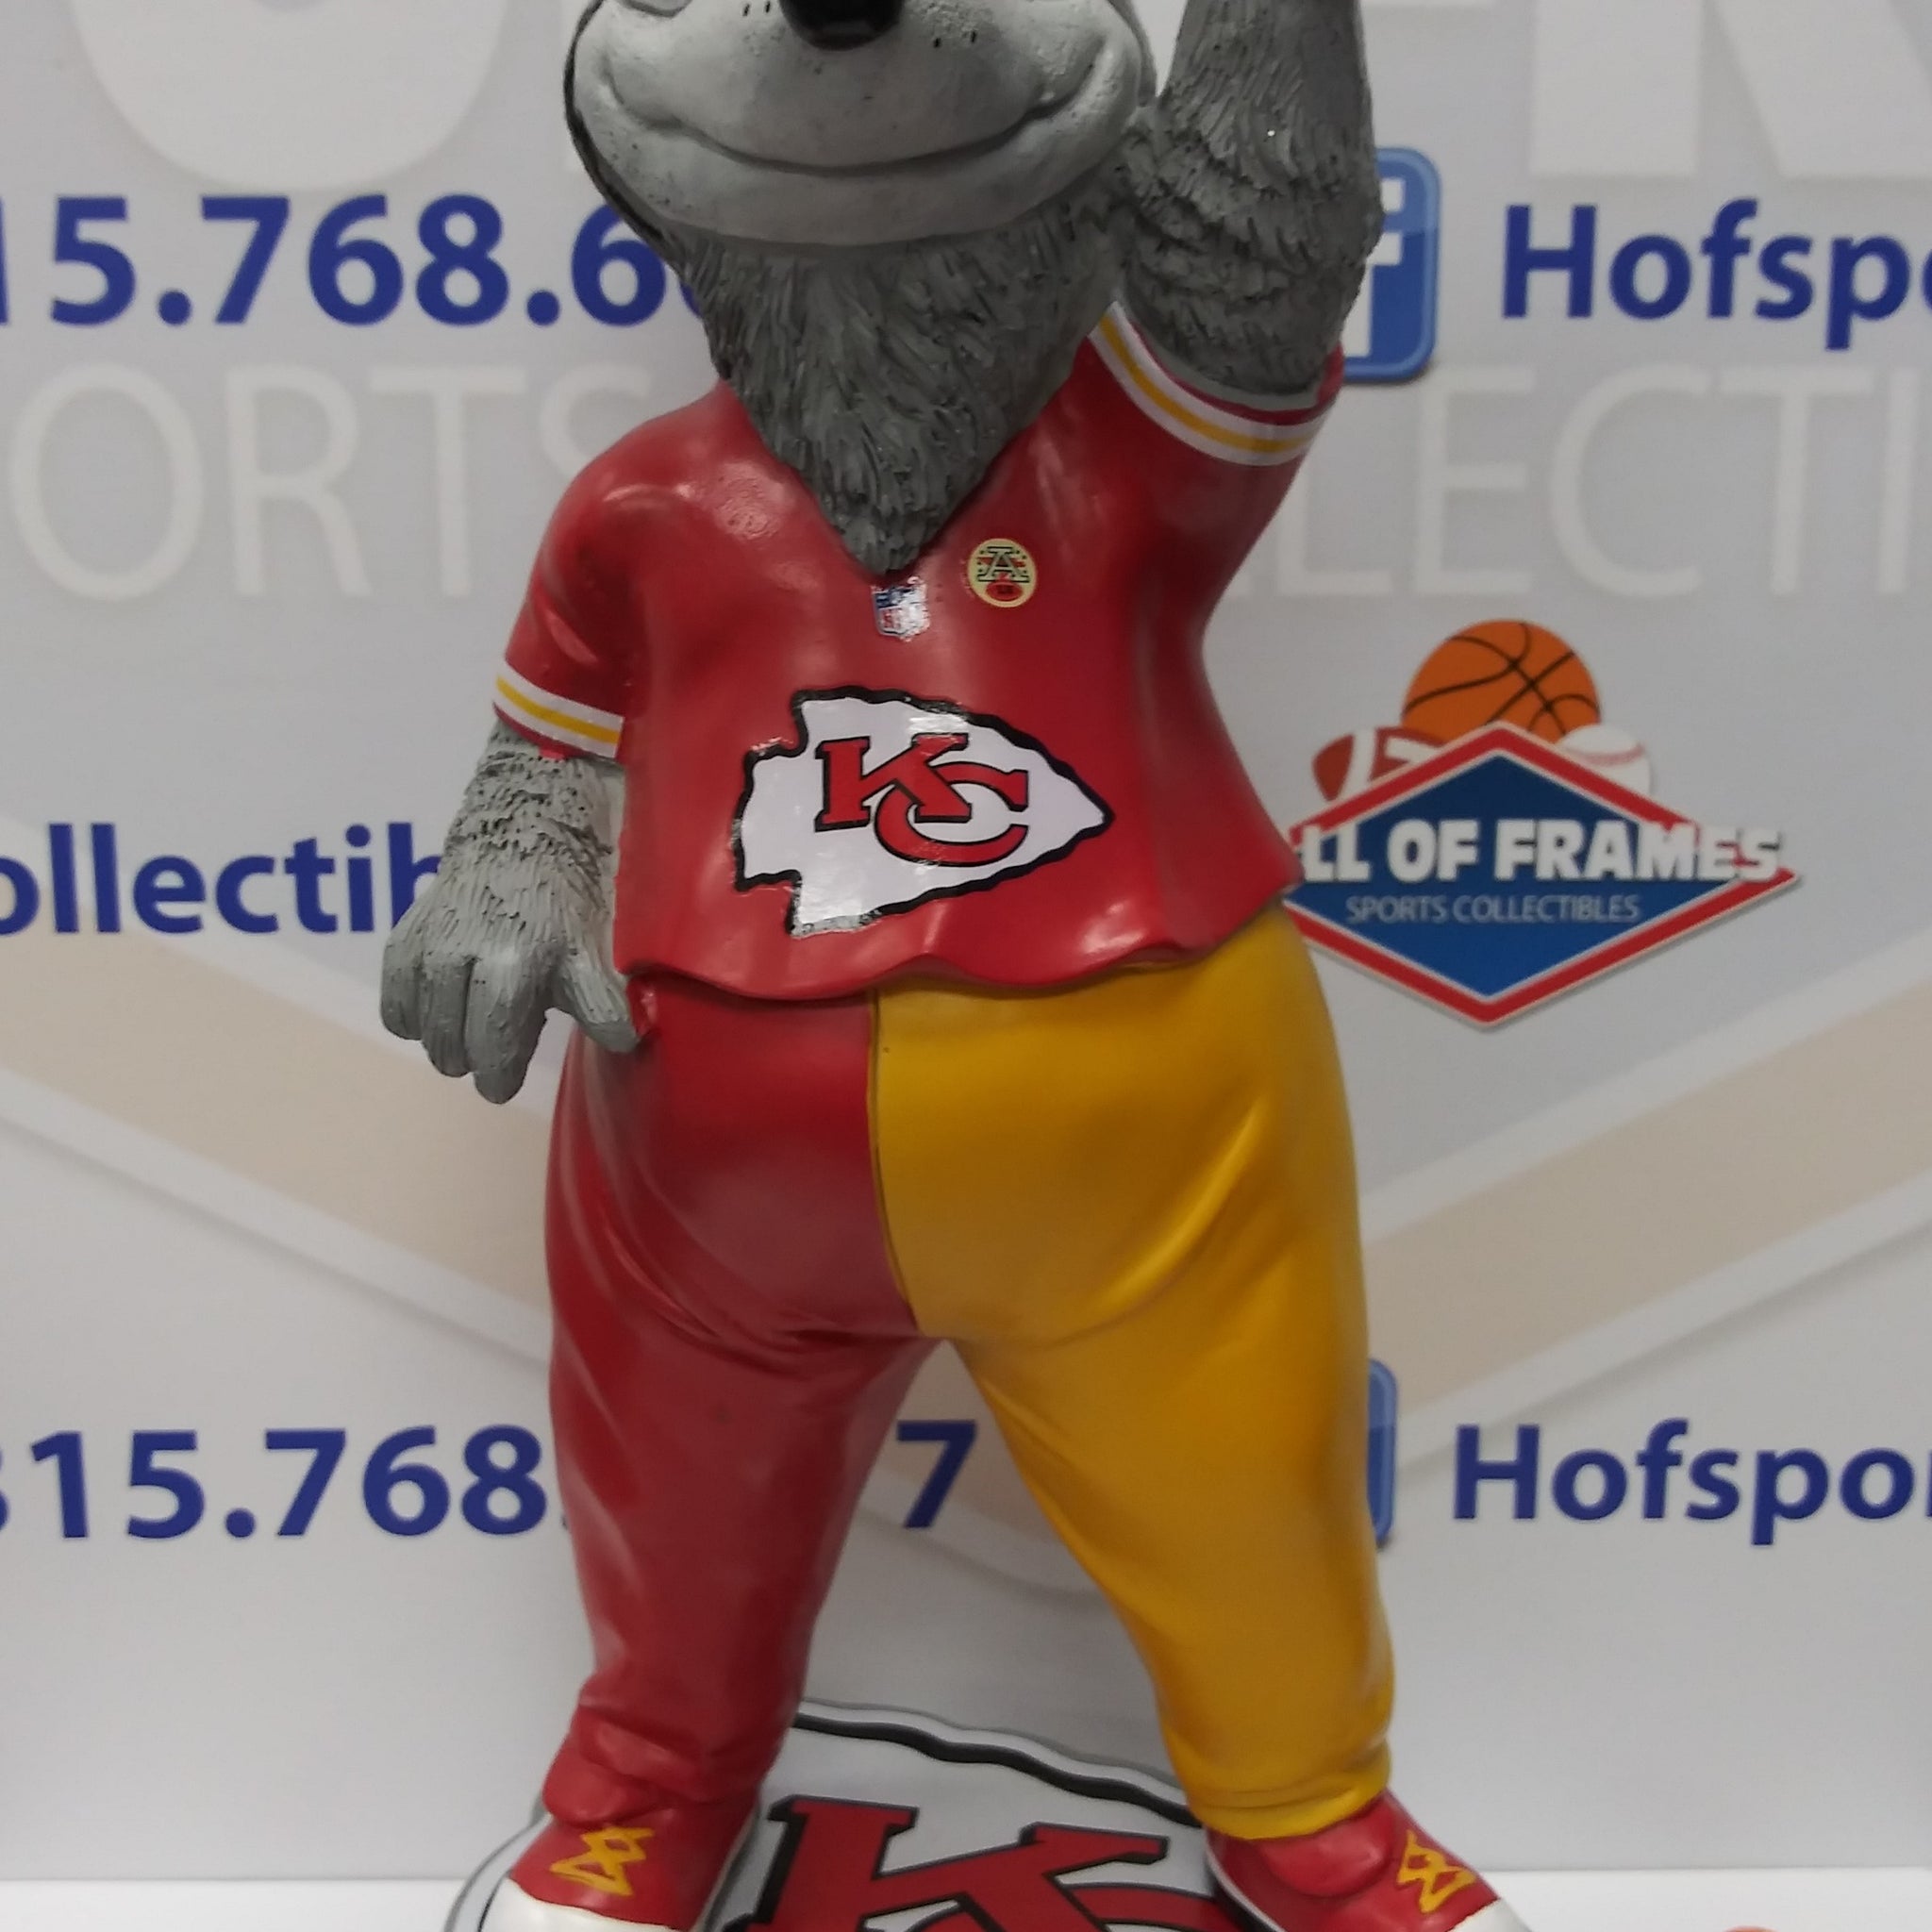 FOCO LIMITED EDITION HANDCRAFTED KANSAS CITY CHIEFS "KC WOLF" MASCOT STATUE!